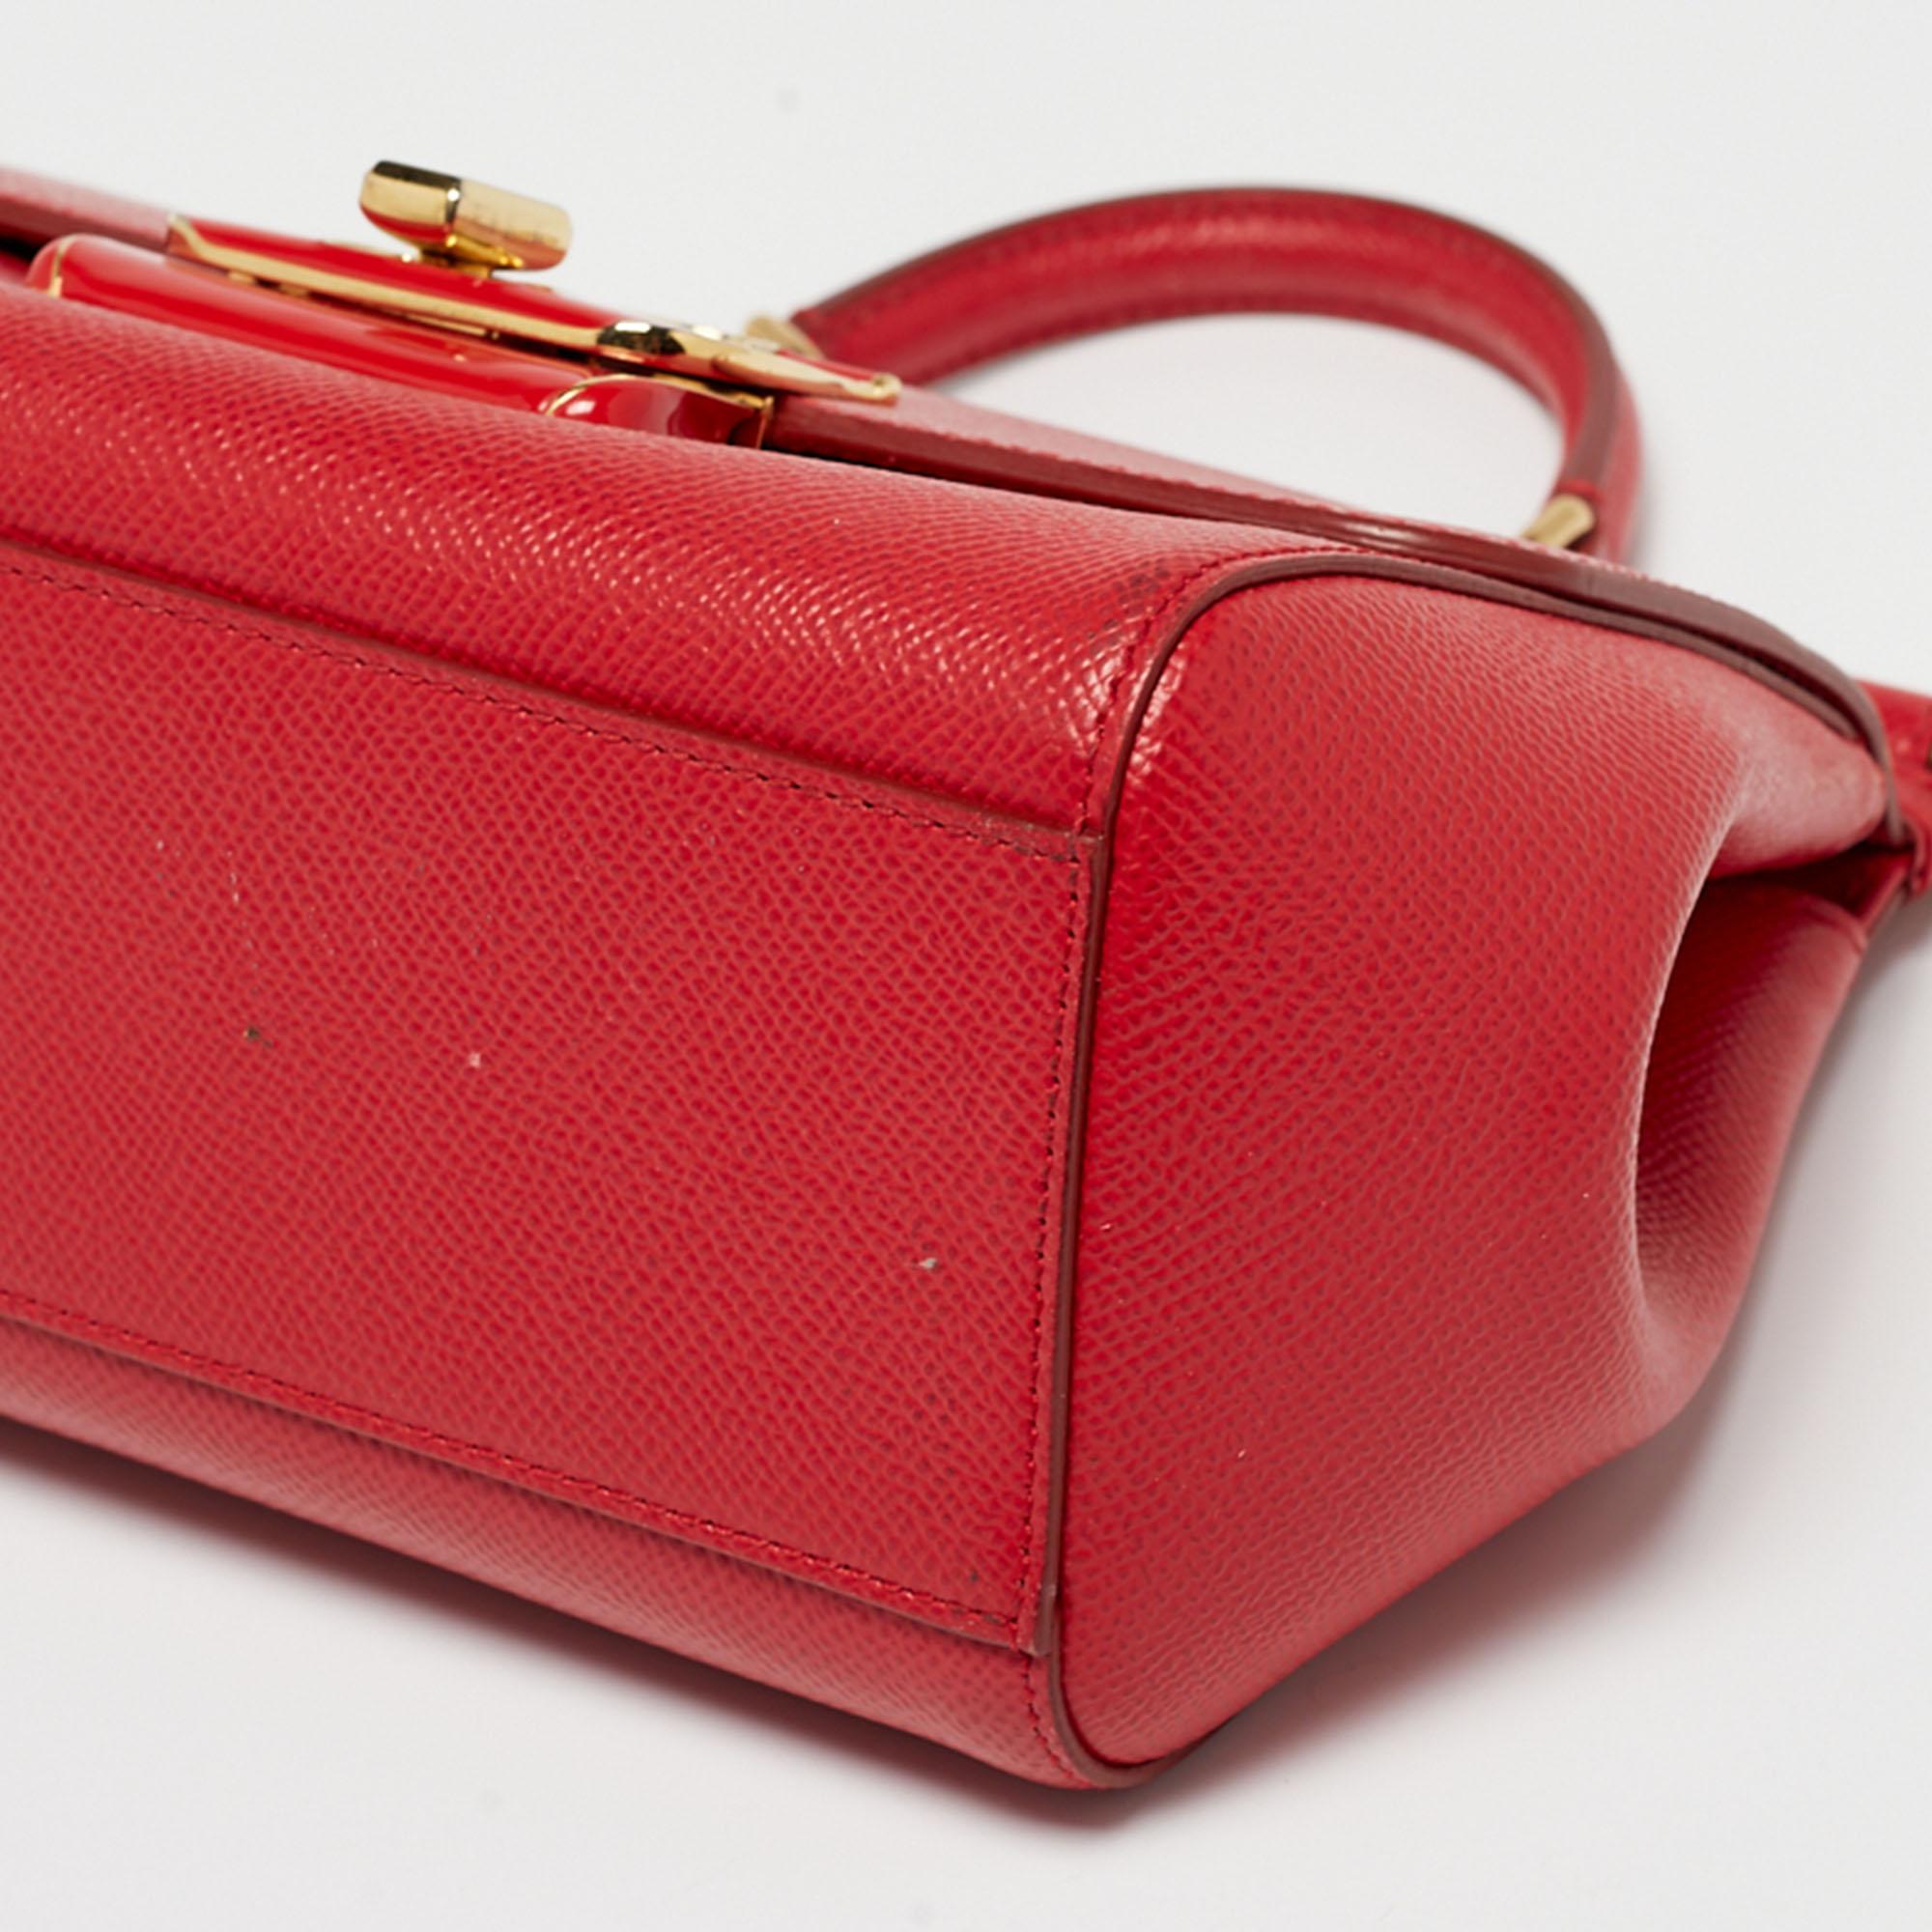 Dolce & Gabbana Red Leather Small Miss Sicily Top Handle Bag 3